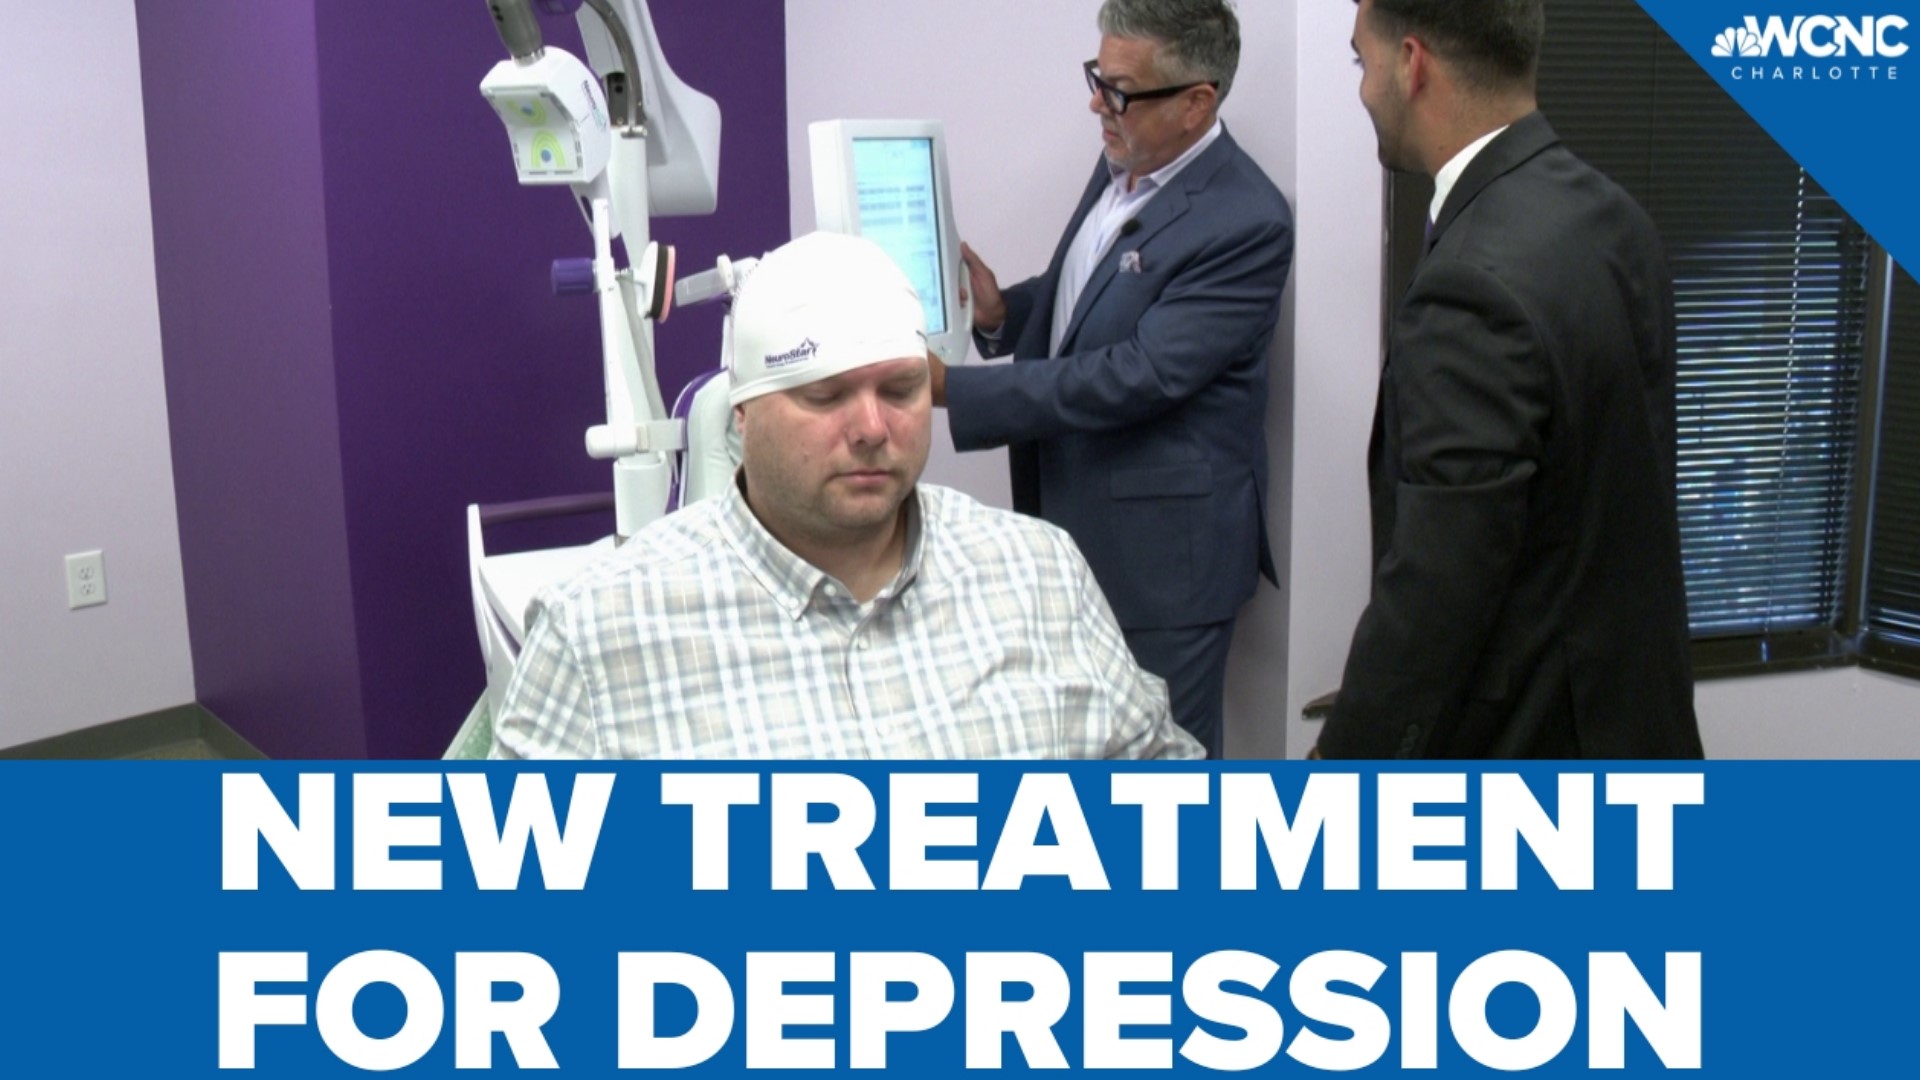 Transcranial Magnetic Stimulation (TMS) is an FDA-approved non-drug option working to reduce depression and hopefully save lives